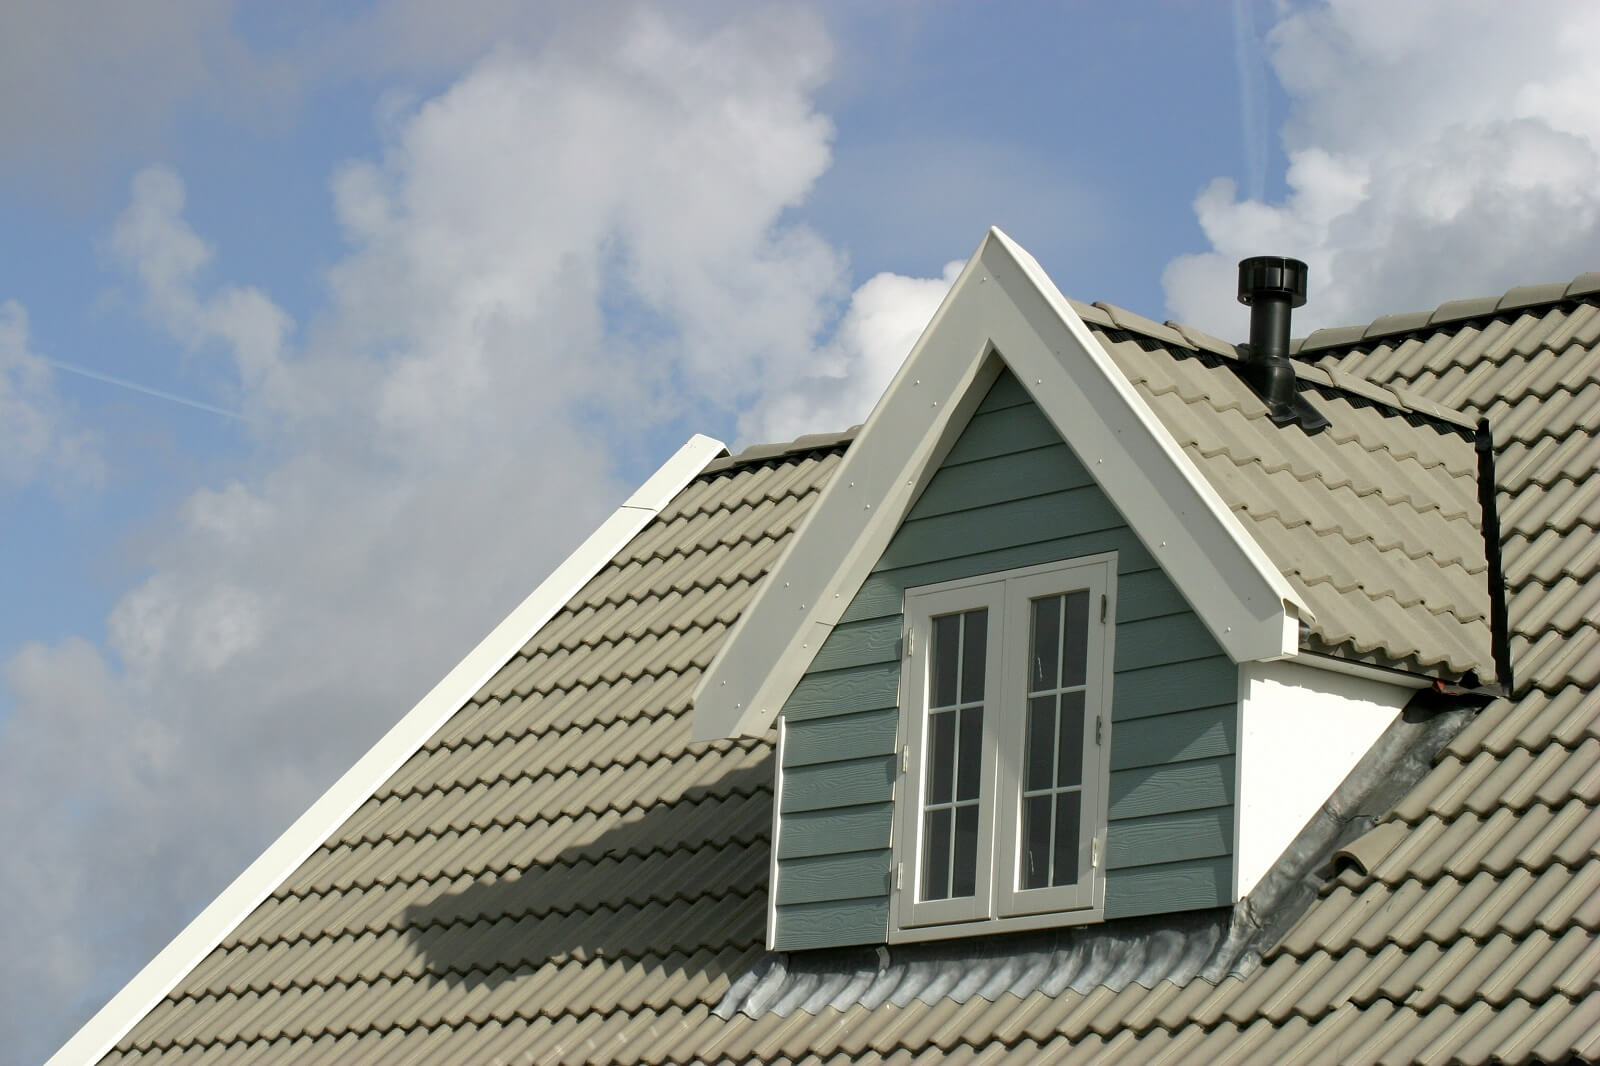 Knowing Everything About What Goes into Roofing